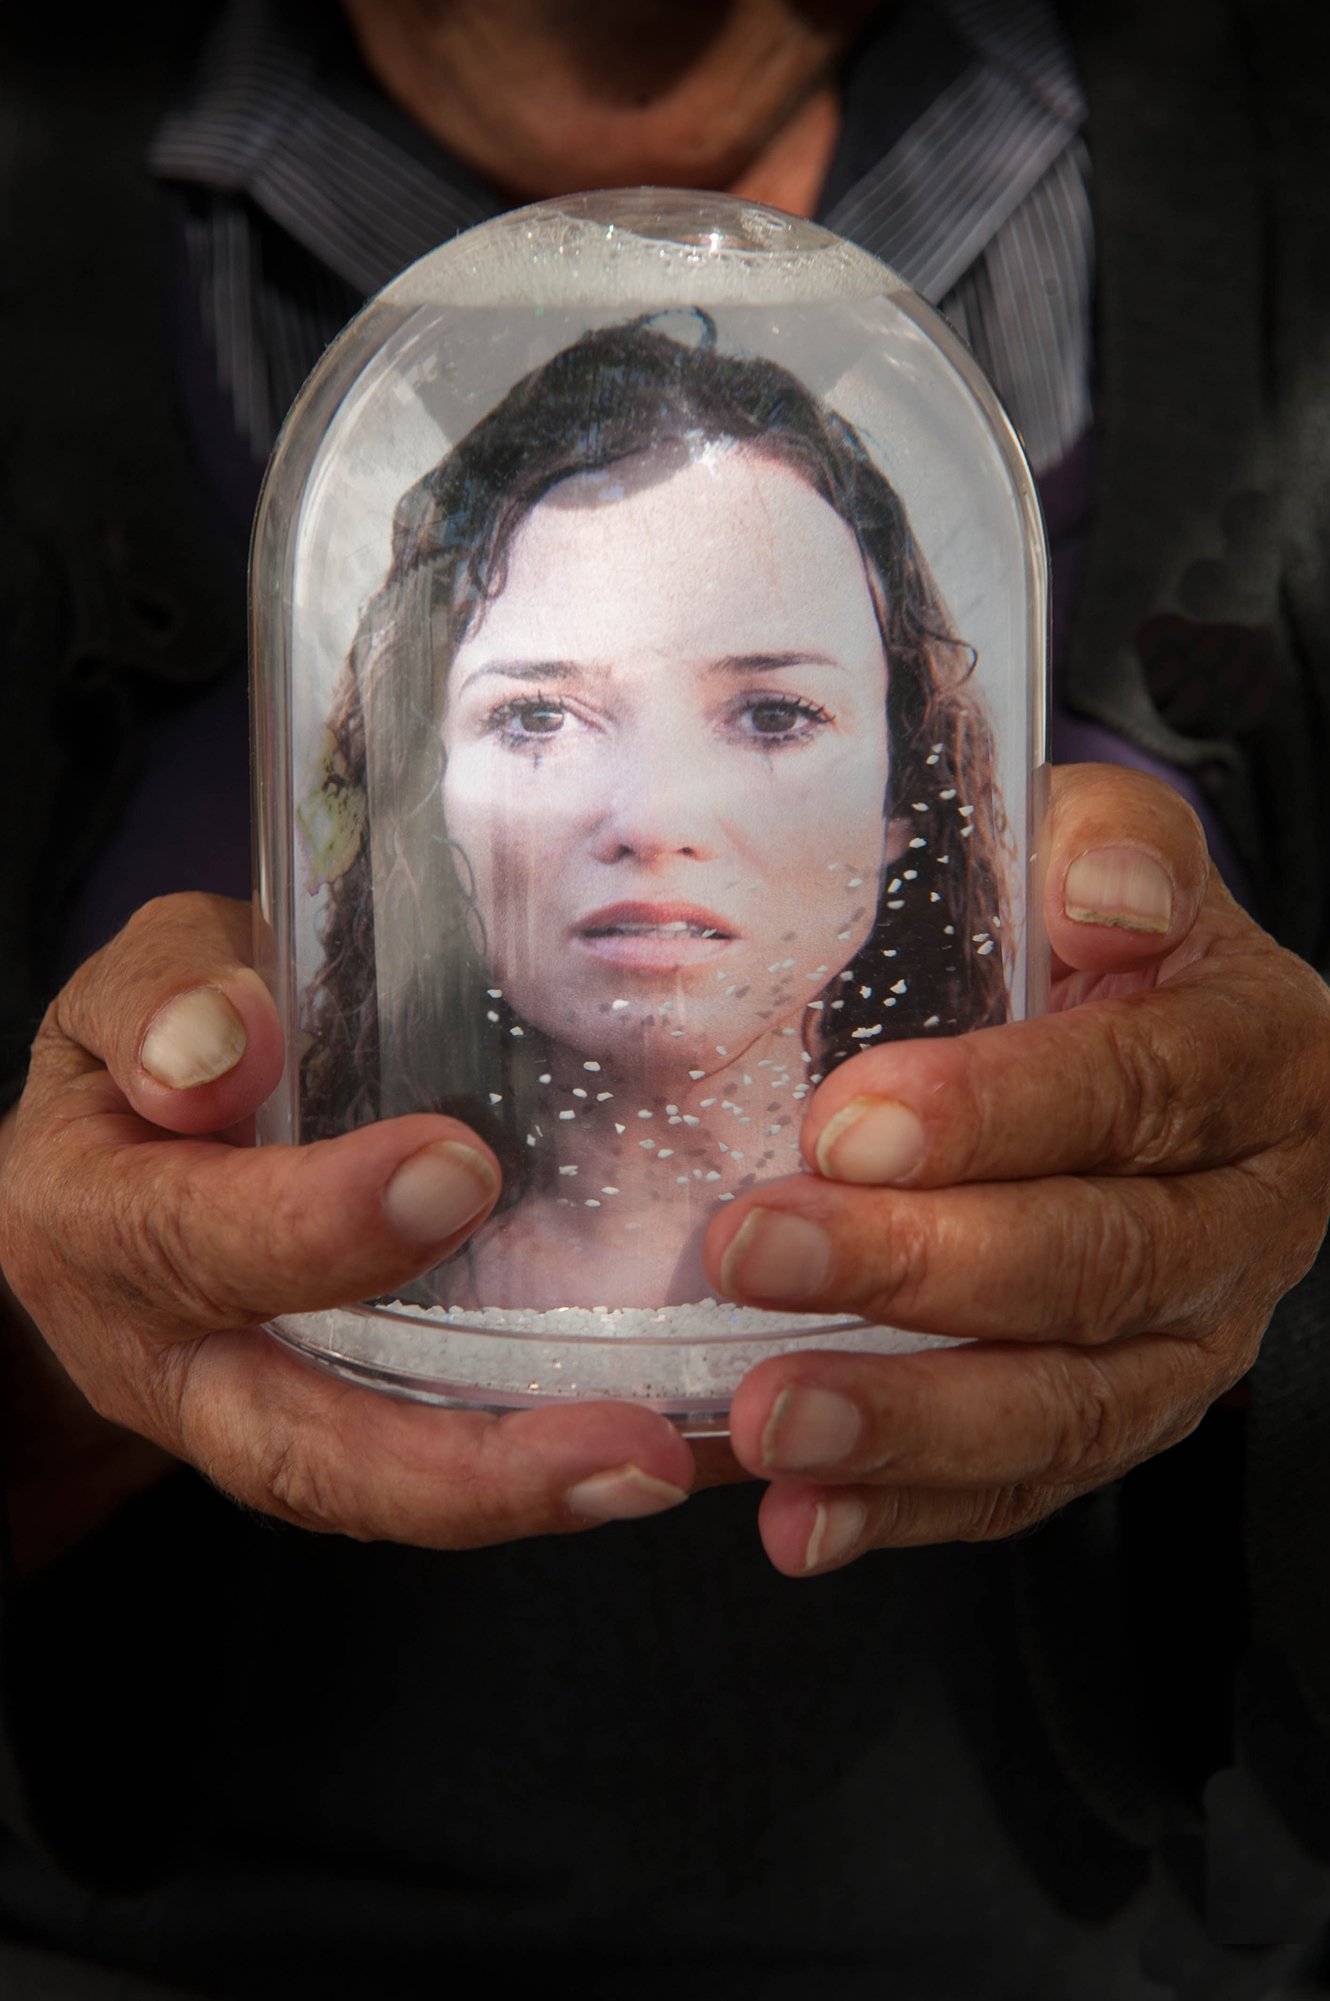 Old hands with dirty thumbnails holding a snowglobe with a large print of a woman's distressed, possibly crying face.